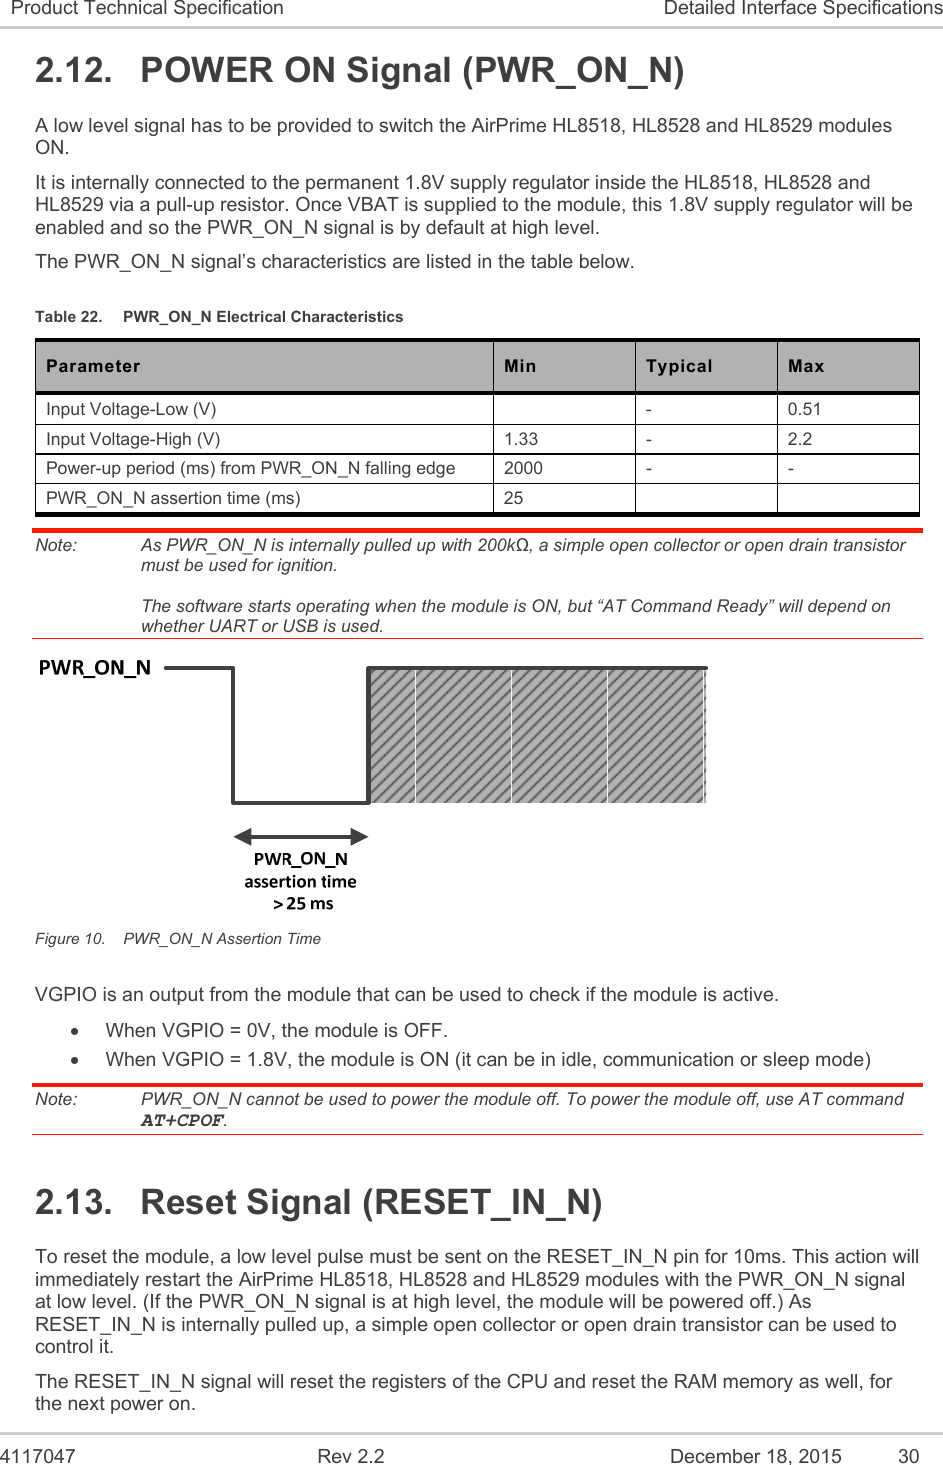  4117047  Rev 2.2  December 18, 2015  30 Product Technical Specification  Detailed Interface Specifications 2.12.  POWER ON Signal (PWR_ON_N) A low level signal has to be provided to switch the AirPrime HL8518, HL8528 and HL8529 modules ON. It is internally connected to the permanent 1.8V supply regulator inside the HL8518, HL8528 and HL8529 via a pull-up resistor. Once VBAT is supplied to the module, this 1.8V supply regulator will be enabled and so the PWR_ON_N signal is by default at high level. The PWR_ON_N signal’s characteristics are listed in the table below. Table 22.  PWR_ON_N Electrical Characteristics Parameter  Min  Typical  Max Input Voltage-Low (V)    -  0.51 Input Voltage-High (V)  1.33  -  2.2 Power-up period (ms) from PWR_ON_N falling edge   2000  -  - PWR_ON_N assertion time (ms)  25     Note:   As PWR_ON_N is internally pulled up with 200kΩ, a simple open collector or open drain transistor must be used for ignition.  The software starts operating when the module is ON, but “AT Command Ready” will depend on whether UART or USB is used.  Figure 10.  PWR_ON_N Assertion Time VGPIO is an output from the module that can be used to check if the module is active.   When VGPIO = 0V, the module is OFF.   When VGPIO = 1.8V, the module is ON (it can be in idle, communication or sleep mode) Note:   PWR_ON_N cannot be used to power the module off. To power the module off, use AT command AT+CPOF. 2.13.  Reset Signal (RESET_IN_N) To reset the module, a low level pulse must be sent on the RESET_IN_N pin for 10ms. This action will immediately restart the AirPrime HL8518, HL8528 and HL8529 modules with the PWR_ON_N signal at low level. (If the PWR_ON_N signal is at high level, the module will be powered off.) As RESET_IN_N is internally pulled up, a simple open collector or open drain transistor can be used to control it. The RESET_IN_N signal will reset the registers of the CPU and reset the RAM memory as well, for the next power on. 